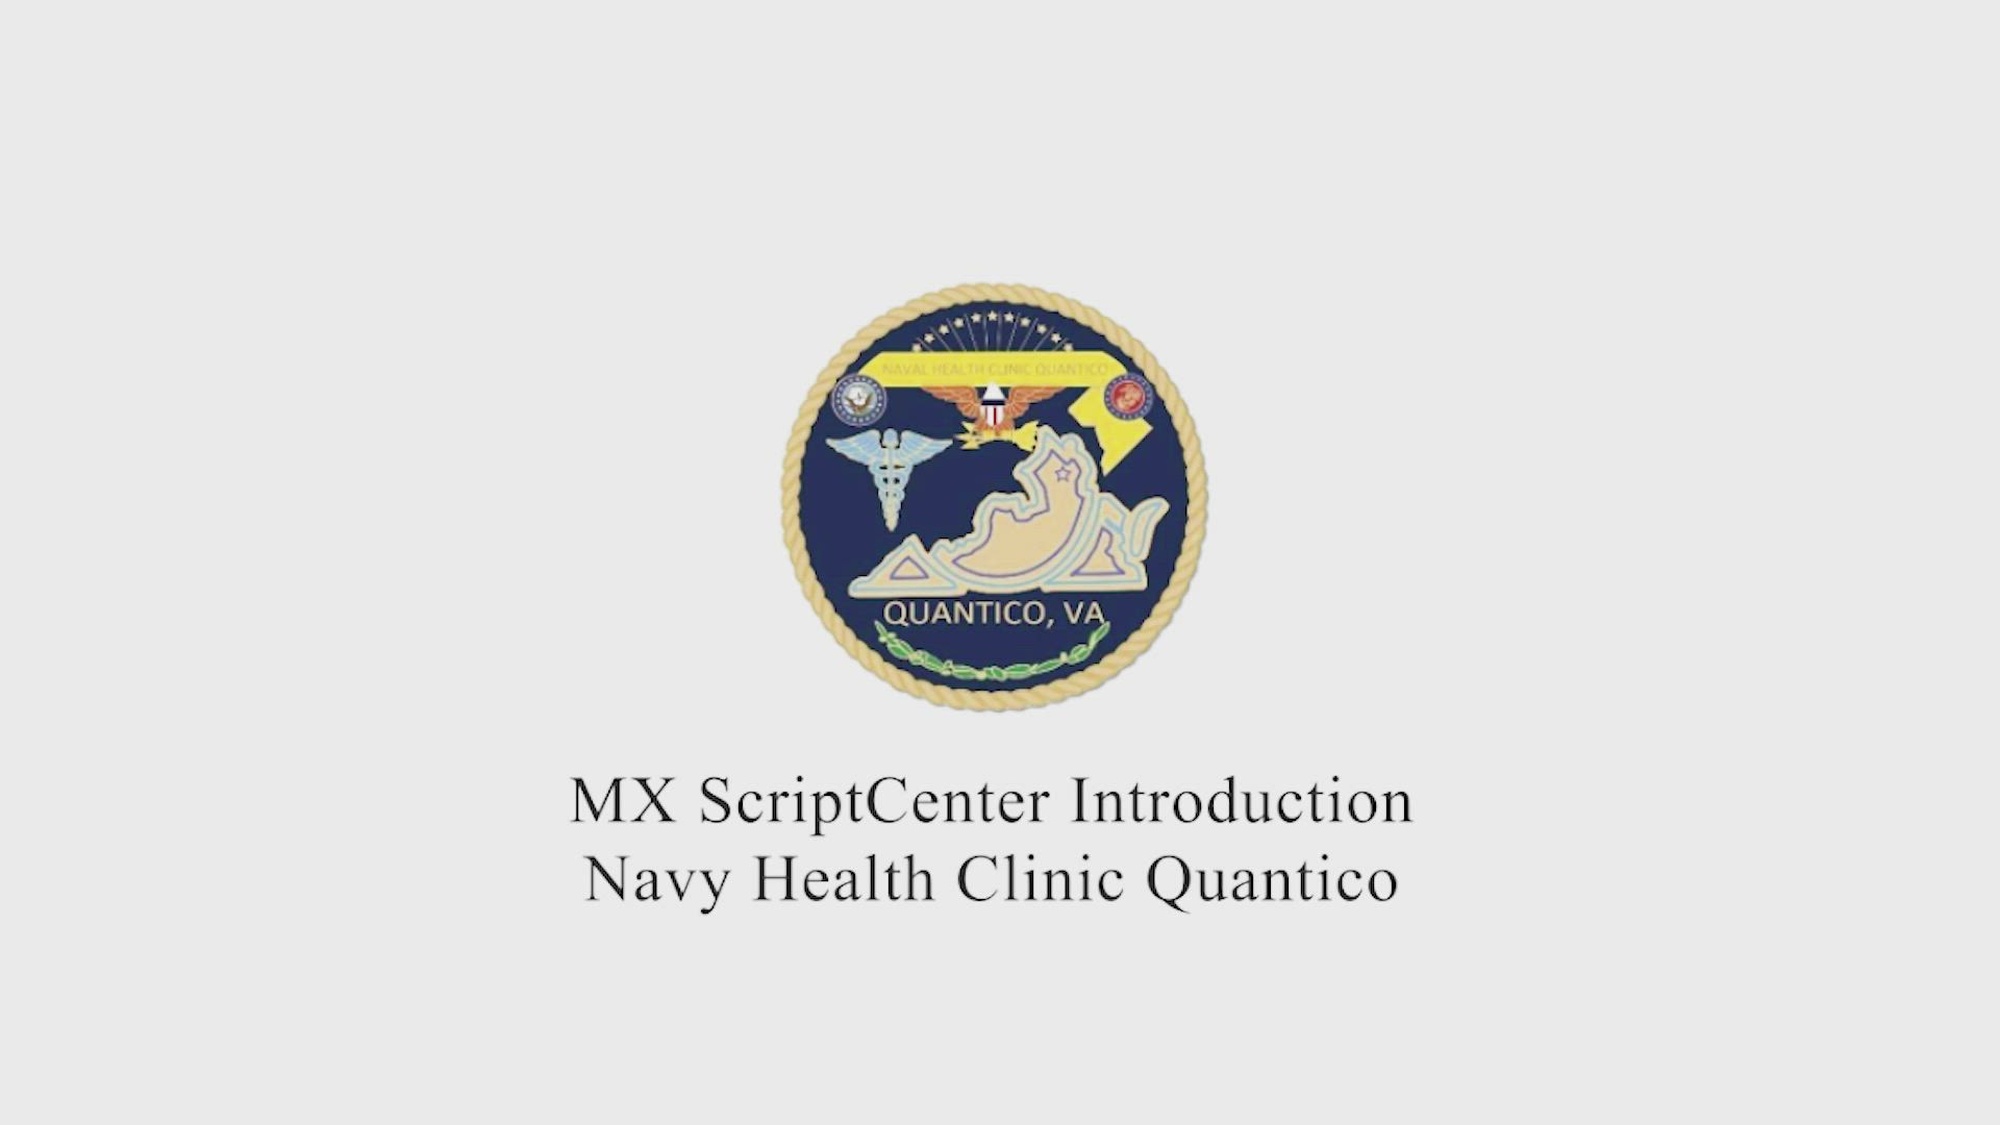 U.S. Navy Hospital Corpsman 2nd Class Blake Dailey, a native of Phelan, California, and a pharmacy technician, stationed with Navy Health Clinic Quantico, explains the new MX ScriptCenter kiosk on Marine Corps Base Quantico, Virginia, July 2, 2024. The kiosk is a new addition to NHCQ, which simplifies and improves customer experiences as they pick up non-refrigerated medication refills. The MX ScriptCenter was implemented as major changes come to the clinic’s pharmacy as staff prepare for its renovations. Pharmacy customers will experience suspension of its services as the pharmacy transitions to a new location by July 22nd. For any issue with the kiosk, contact the front desk (703) 784-1580 or nearest clinic representative. For updates on the pharmacy procedures, you can also visit the NHCQ or MCBQ Facebook pages: https://www.facebook.com/NavalHealthClinicQuantico/; https://www.facebook.com/MarineCorpsBaseQuantico/. (U.S. Marine Corps video by Cpl. Keahi J. Soomanstanton)